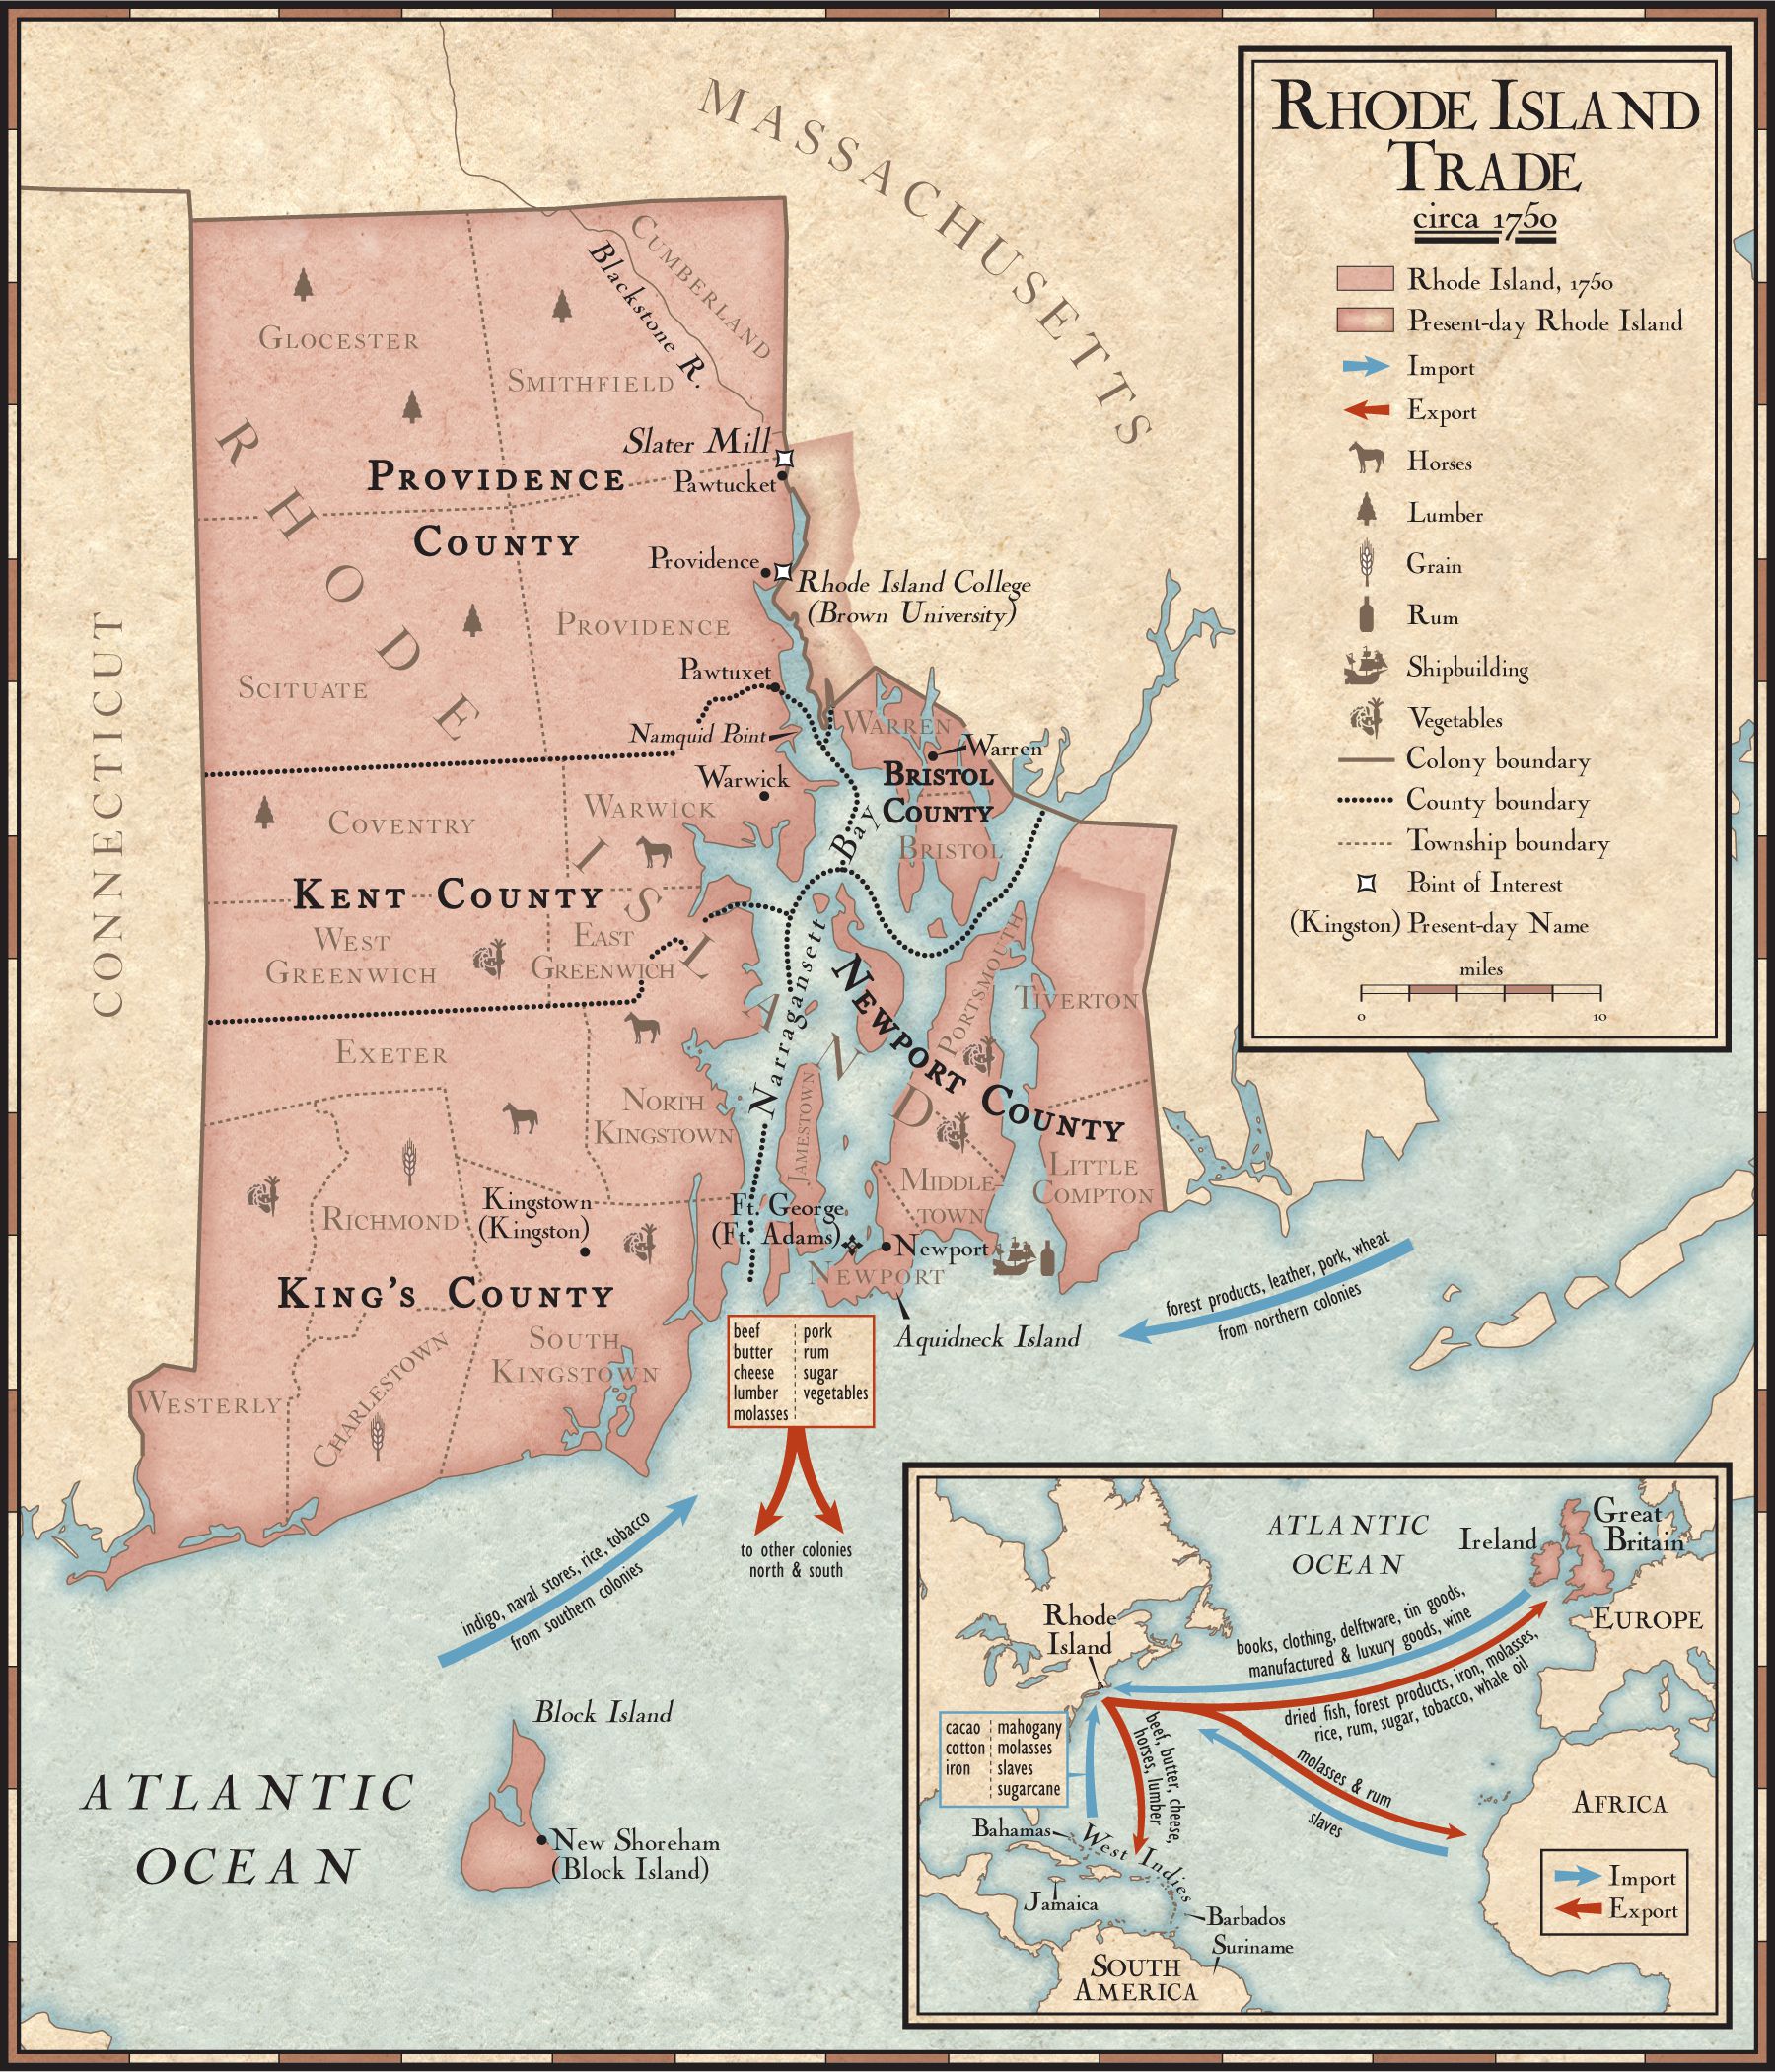 rhode island map Trade In Rhode Island During The 1700s National Geographic Society rhode island map